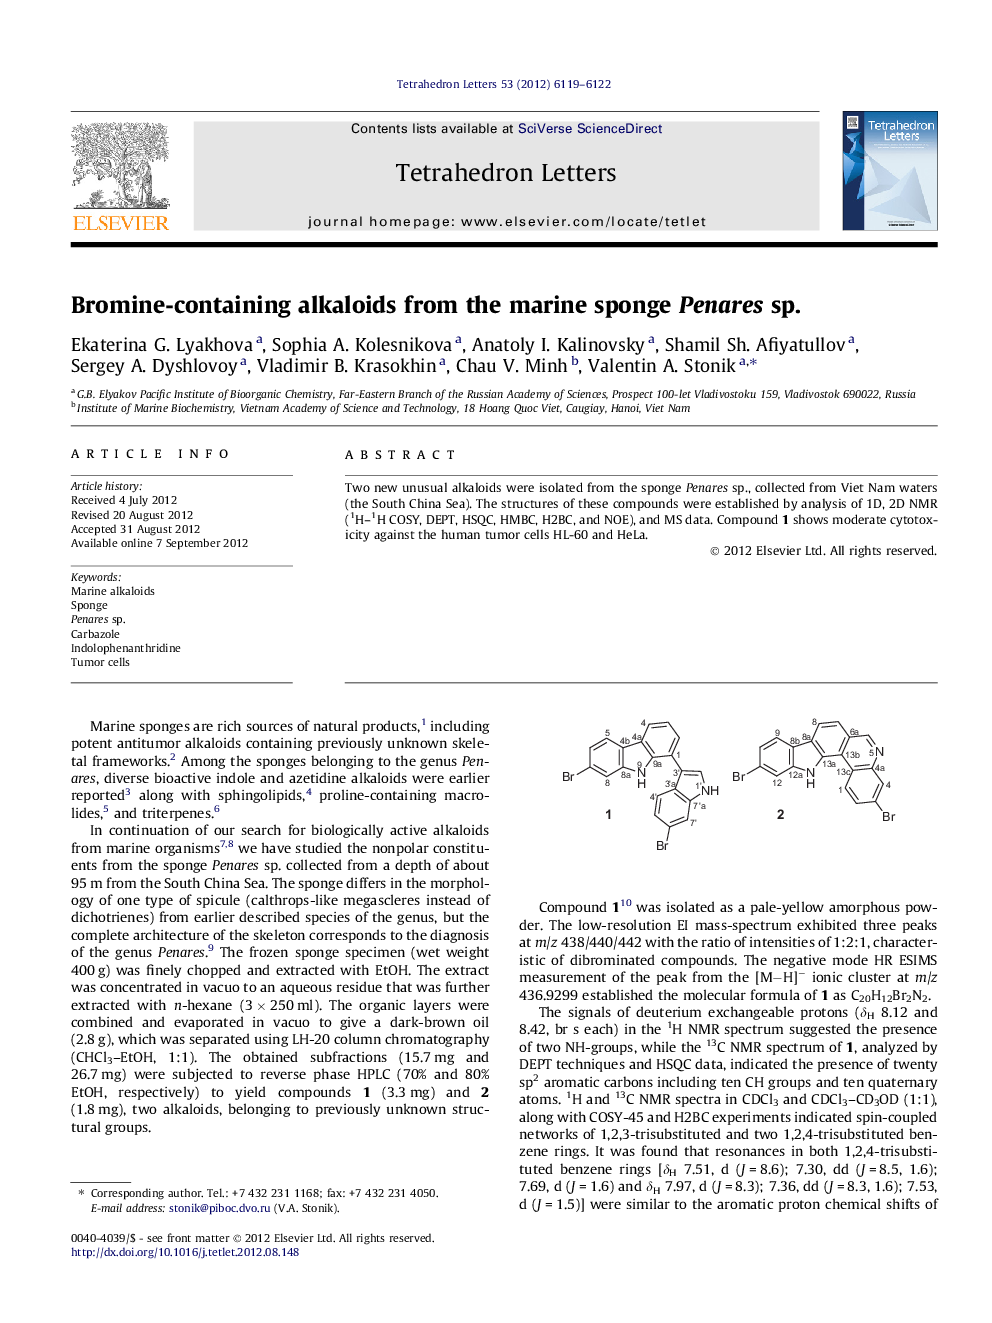 Bromine-containing alkaloids from the marine sponge Penares sp.